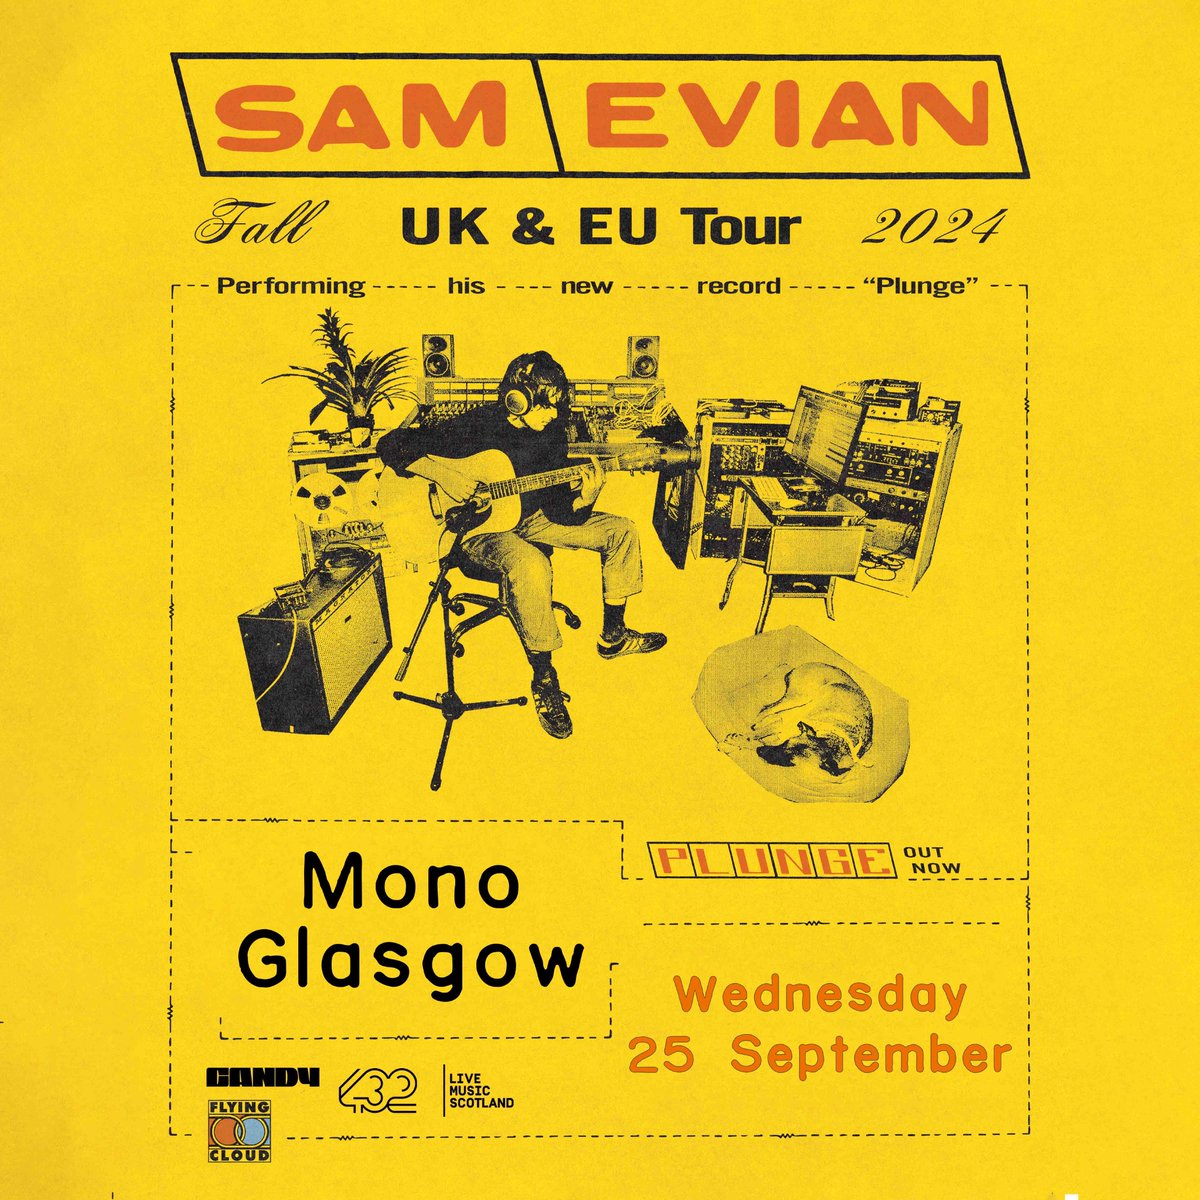 ON SALE NOW!! NY multi-instrumentalist and purveyor of premium vintage rock smoothness @sam3vian returns to Scotland with new album Plunge, performing at @Monoglasgow on Wed 25 Sep ✨ Tickets on sale NOW! 🎟️bit.ly/3xRwO7U